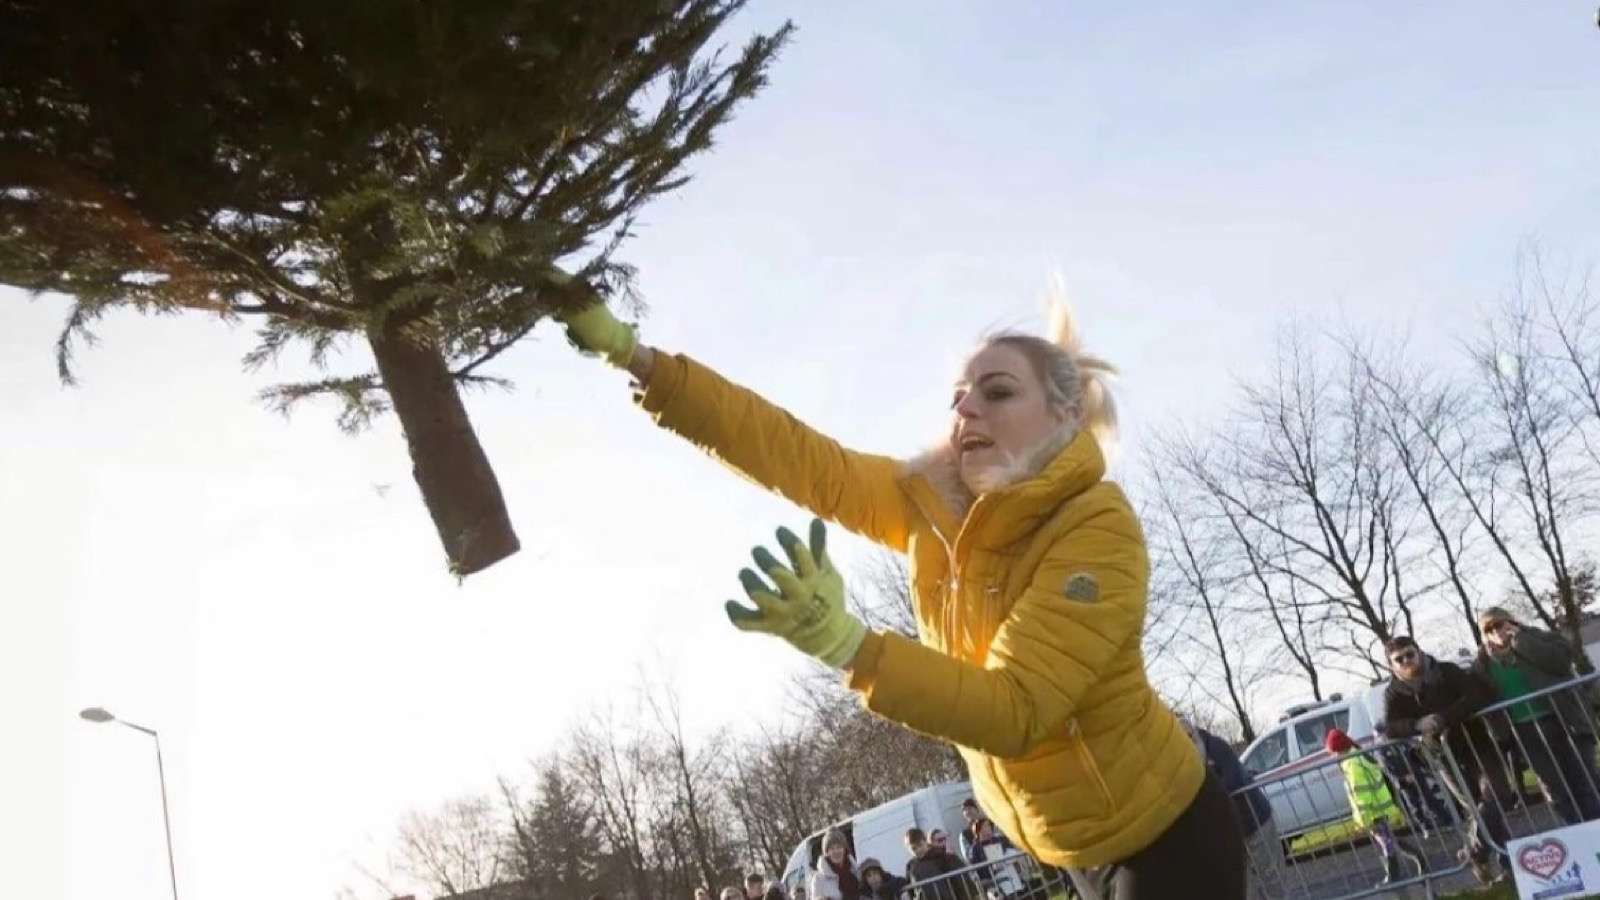 woman Christmas tree throwing contest